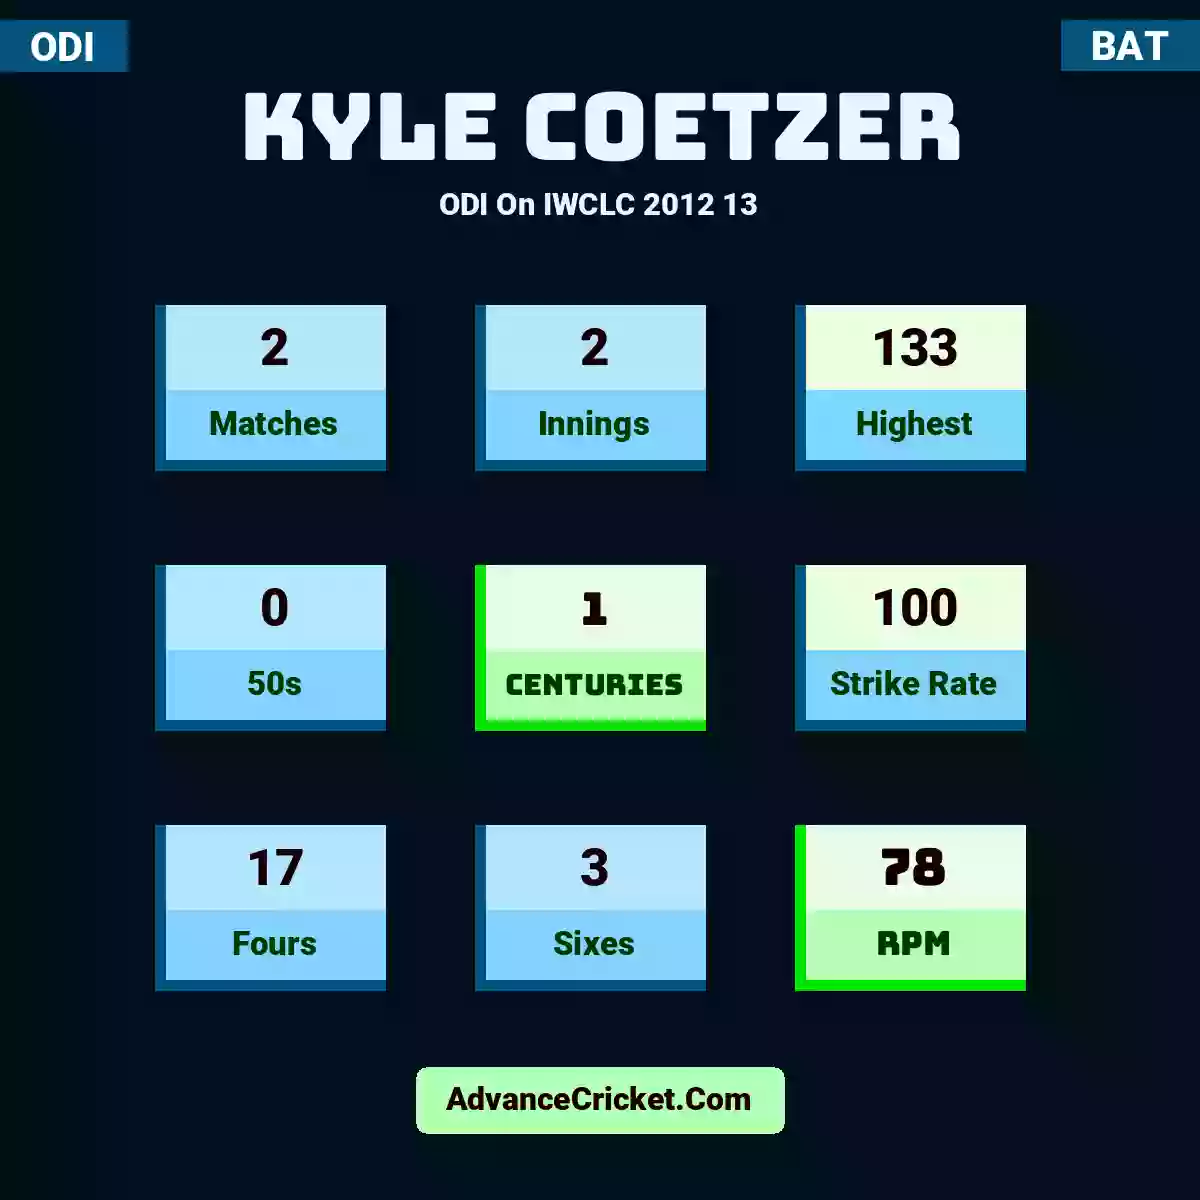 Kyle Coetzer ODI  On IWCLC 2012 13, Kyle Coetzer played 2 matches, scored 133 runs as highest, 0 half-centuries, and 1 centuries, with a strike rate of 100. K.Coetzer hit 17 fours and 3 sixes, with an RPM of 78.